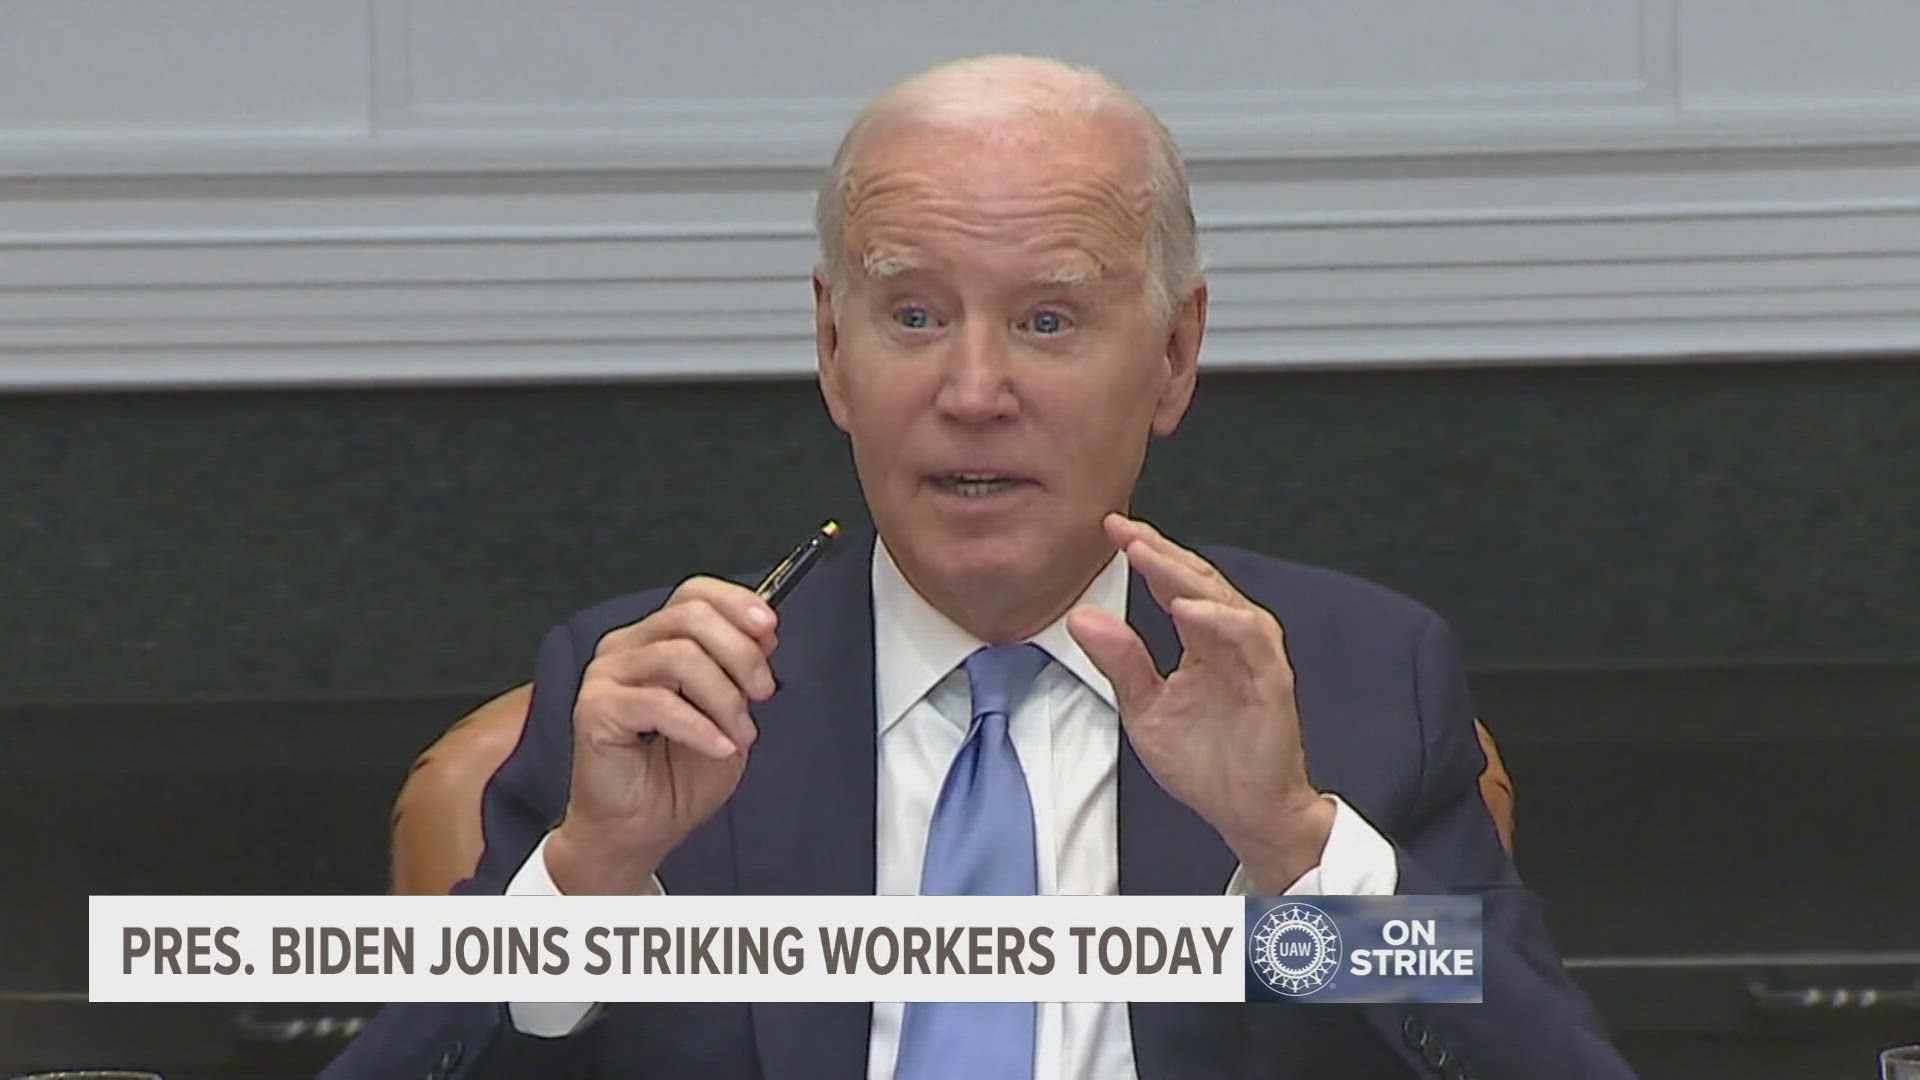 Biden will not have any part in the ongoing negotiations between the UAW and automakers, but will show solidarity with the working class.